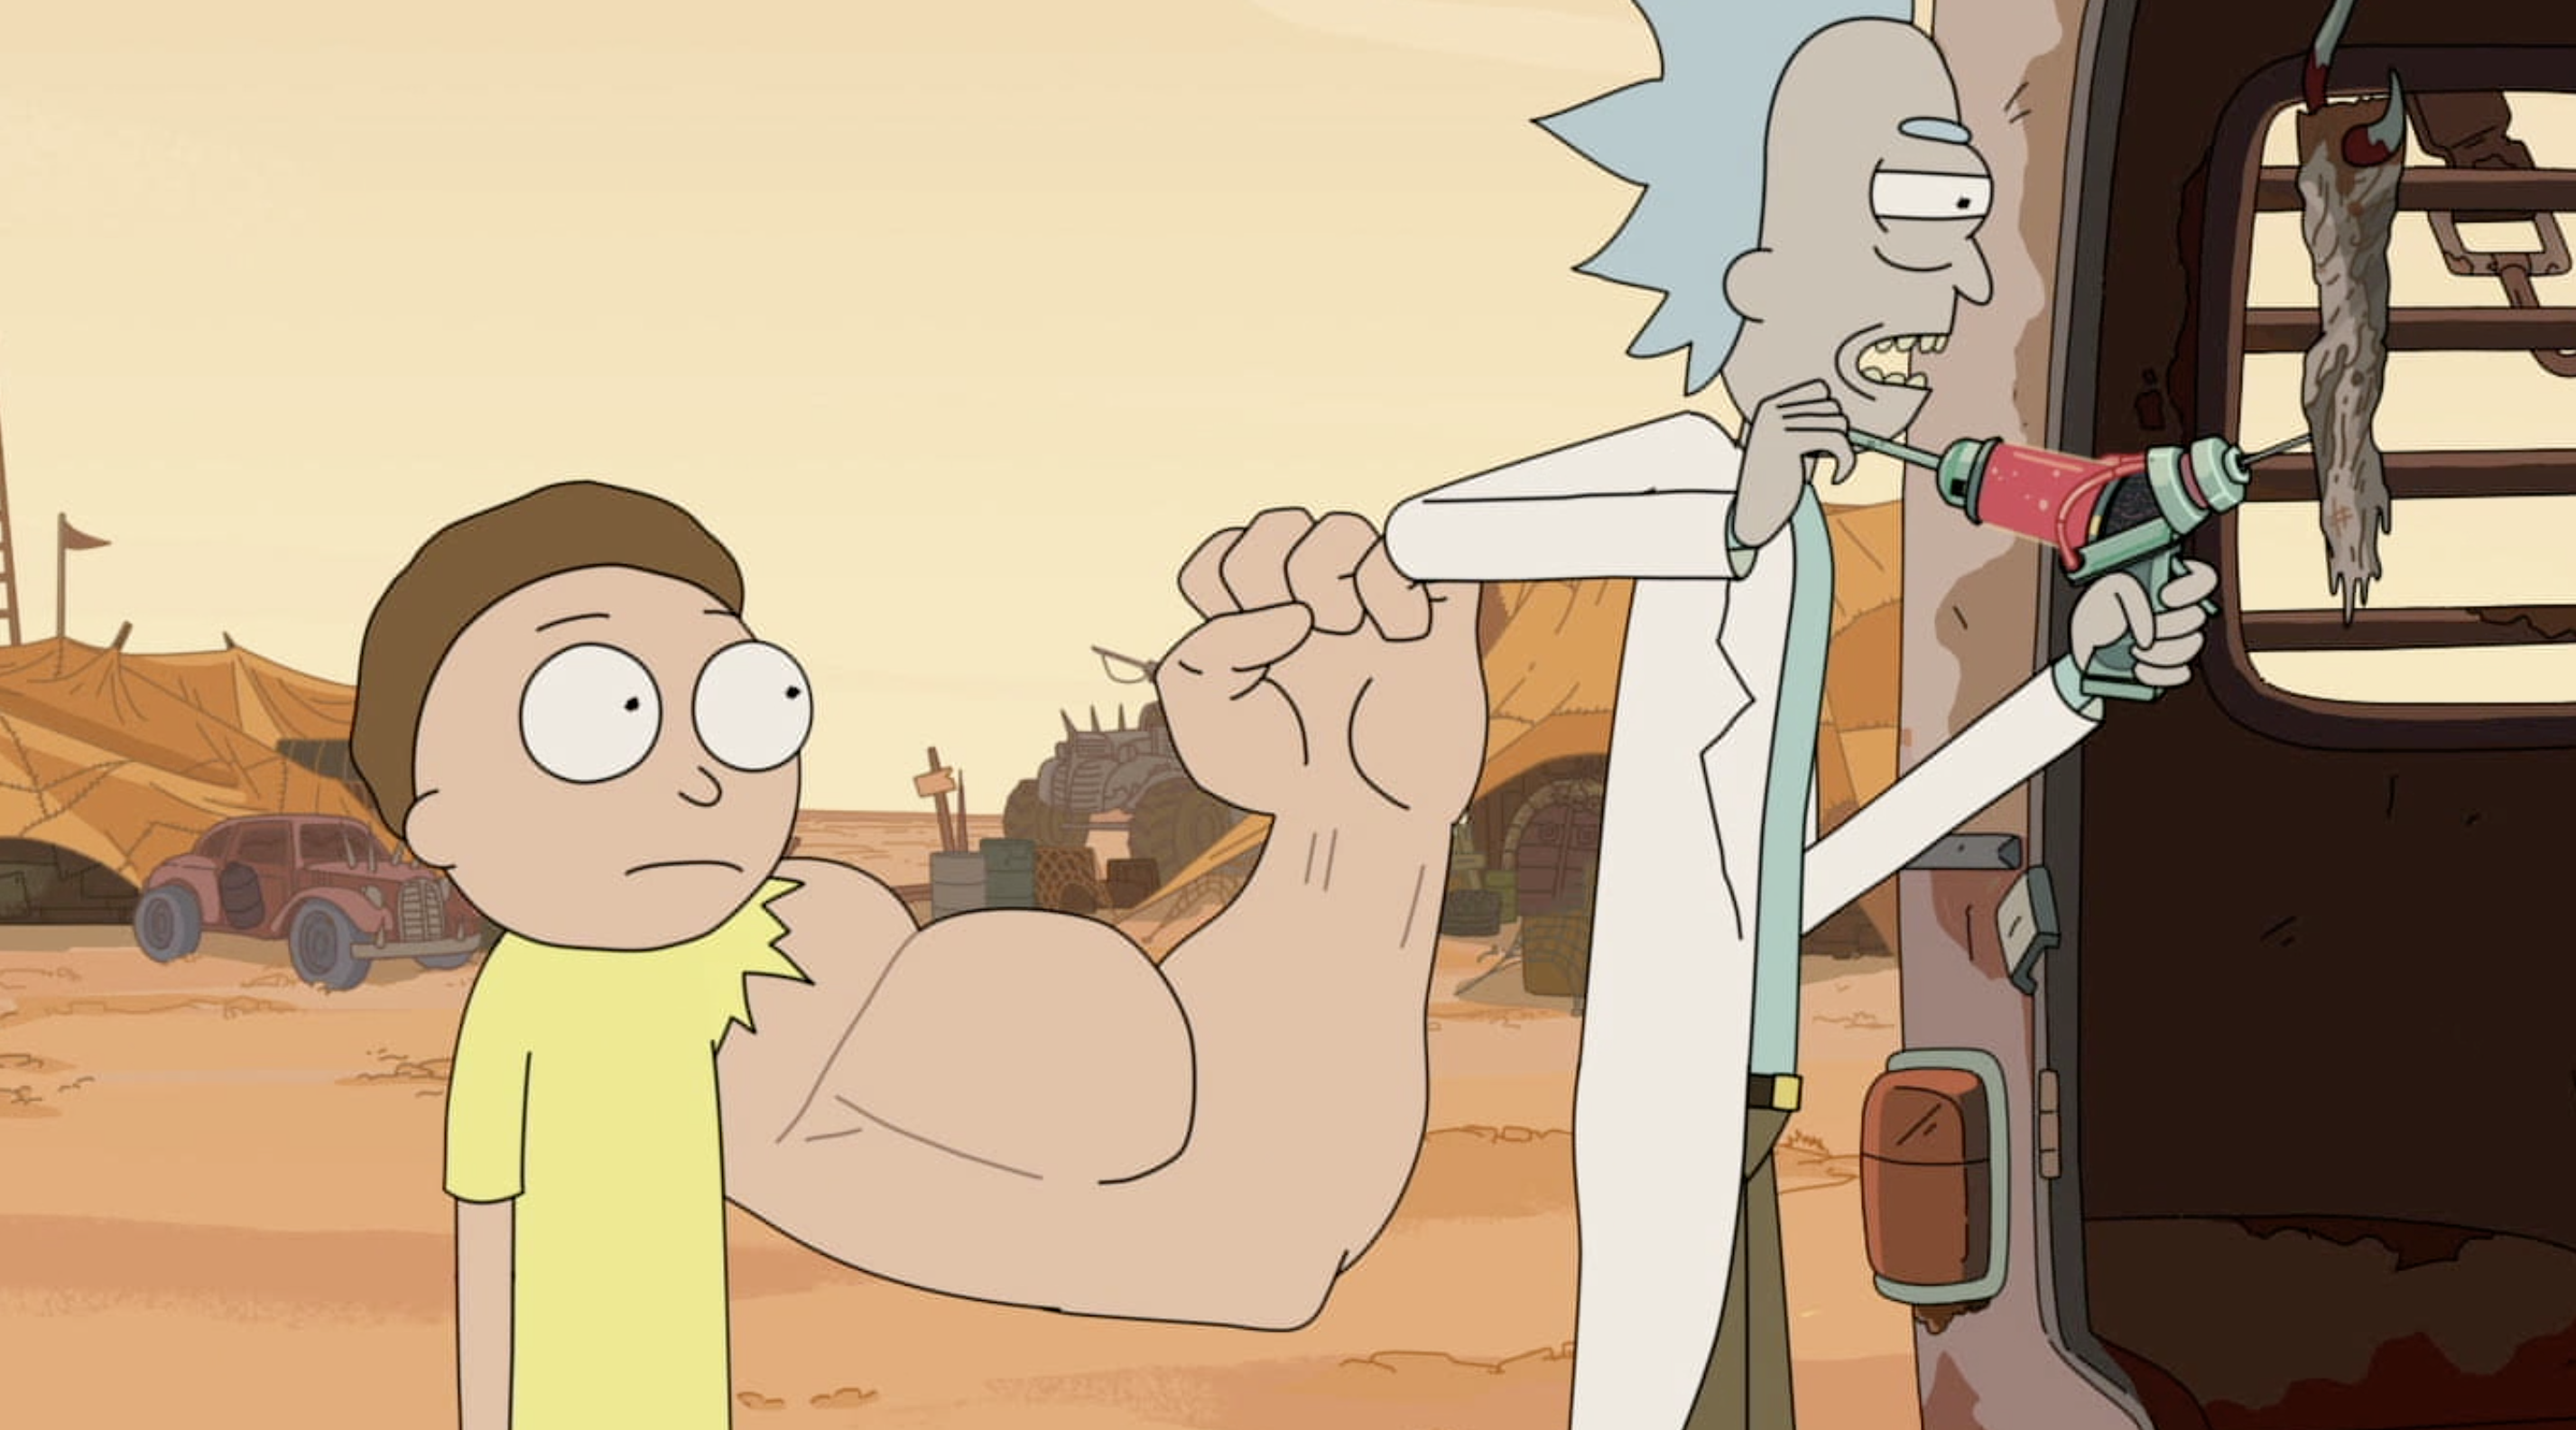 Rick and Morty finally returned to Adult Swim with a Mad Max: Fury Road sen...